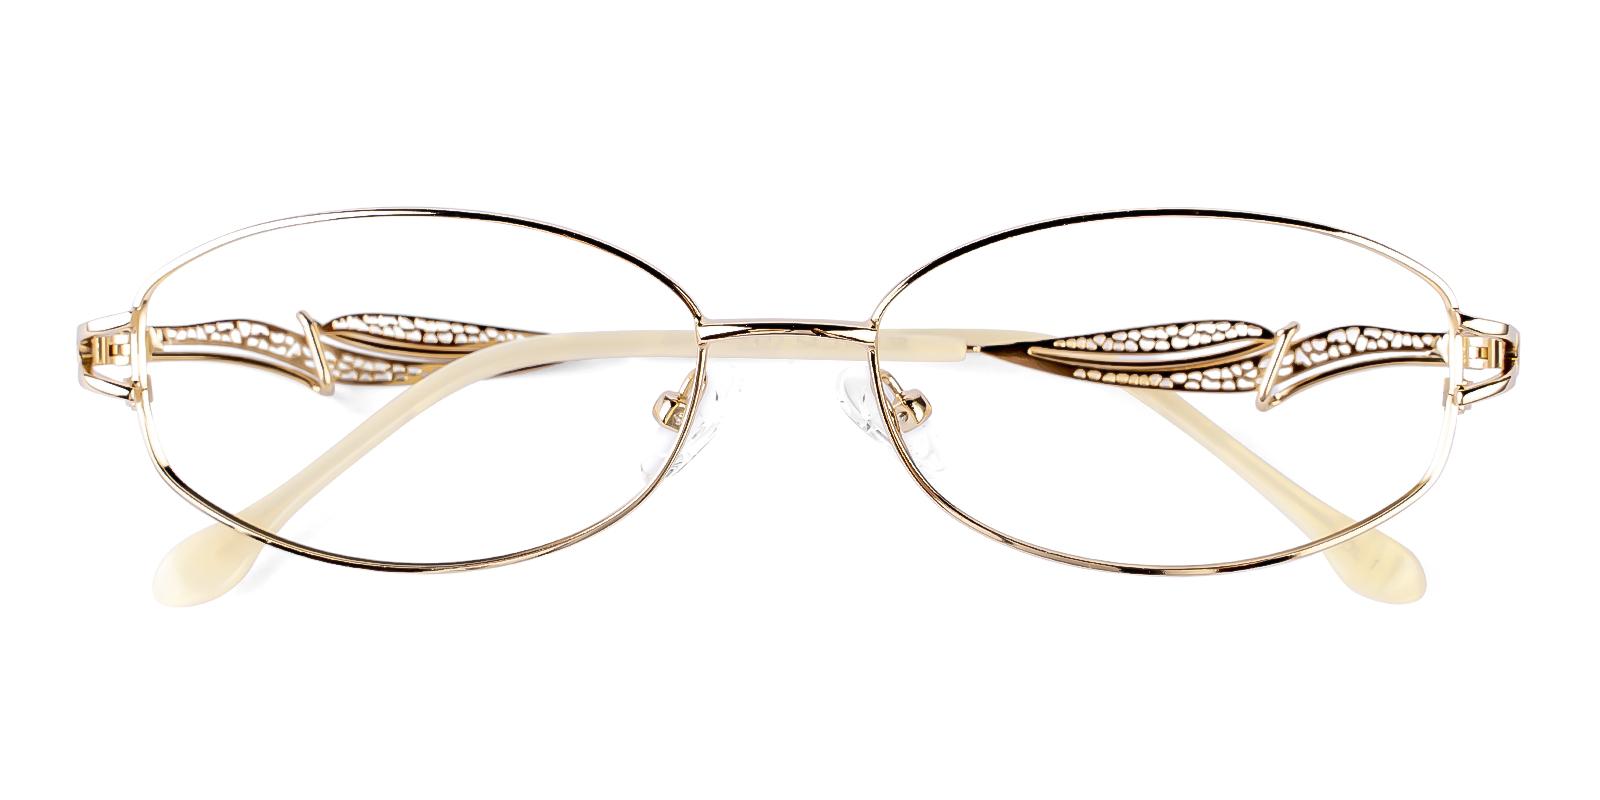 Glplious Gold Metal Eyeglasses , NosePads Frames from ABBE Glasses